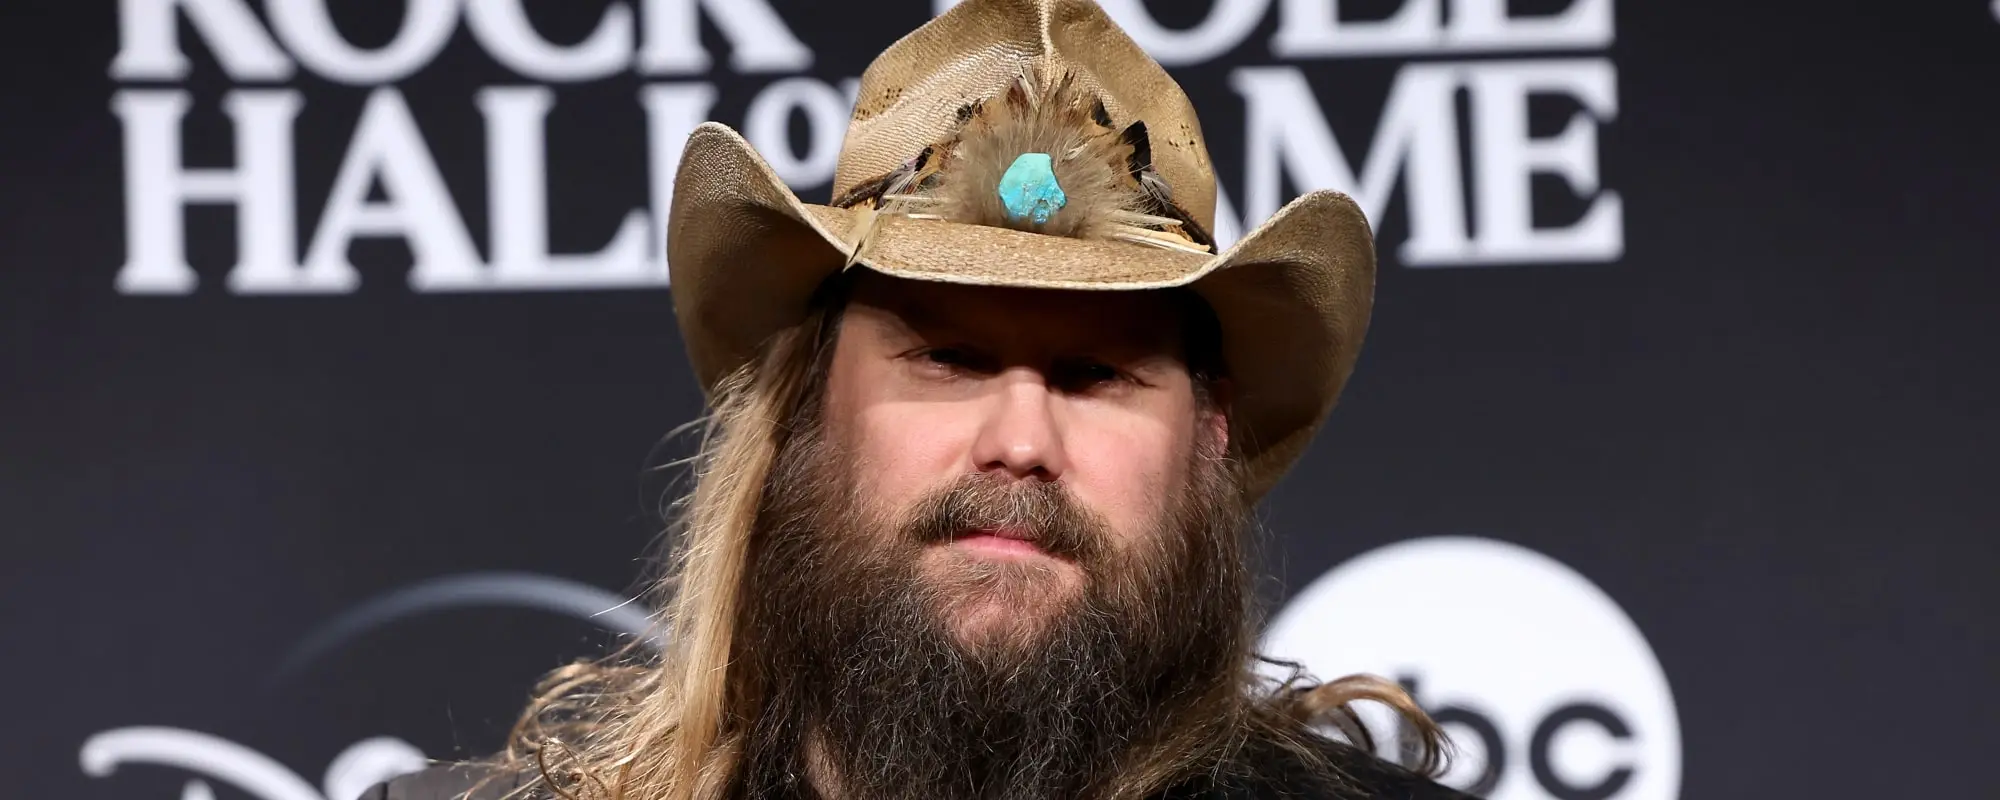 Chris Stapleton Rides “White Horse” to the Top of the Country Charts With Fourth Career No. 1